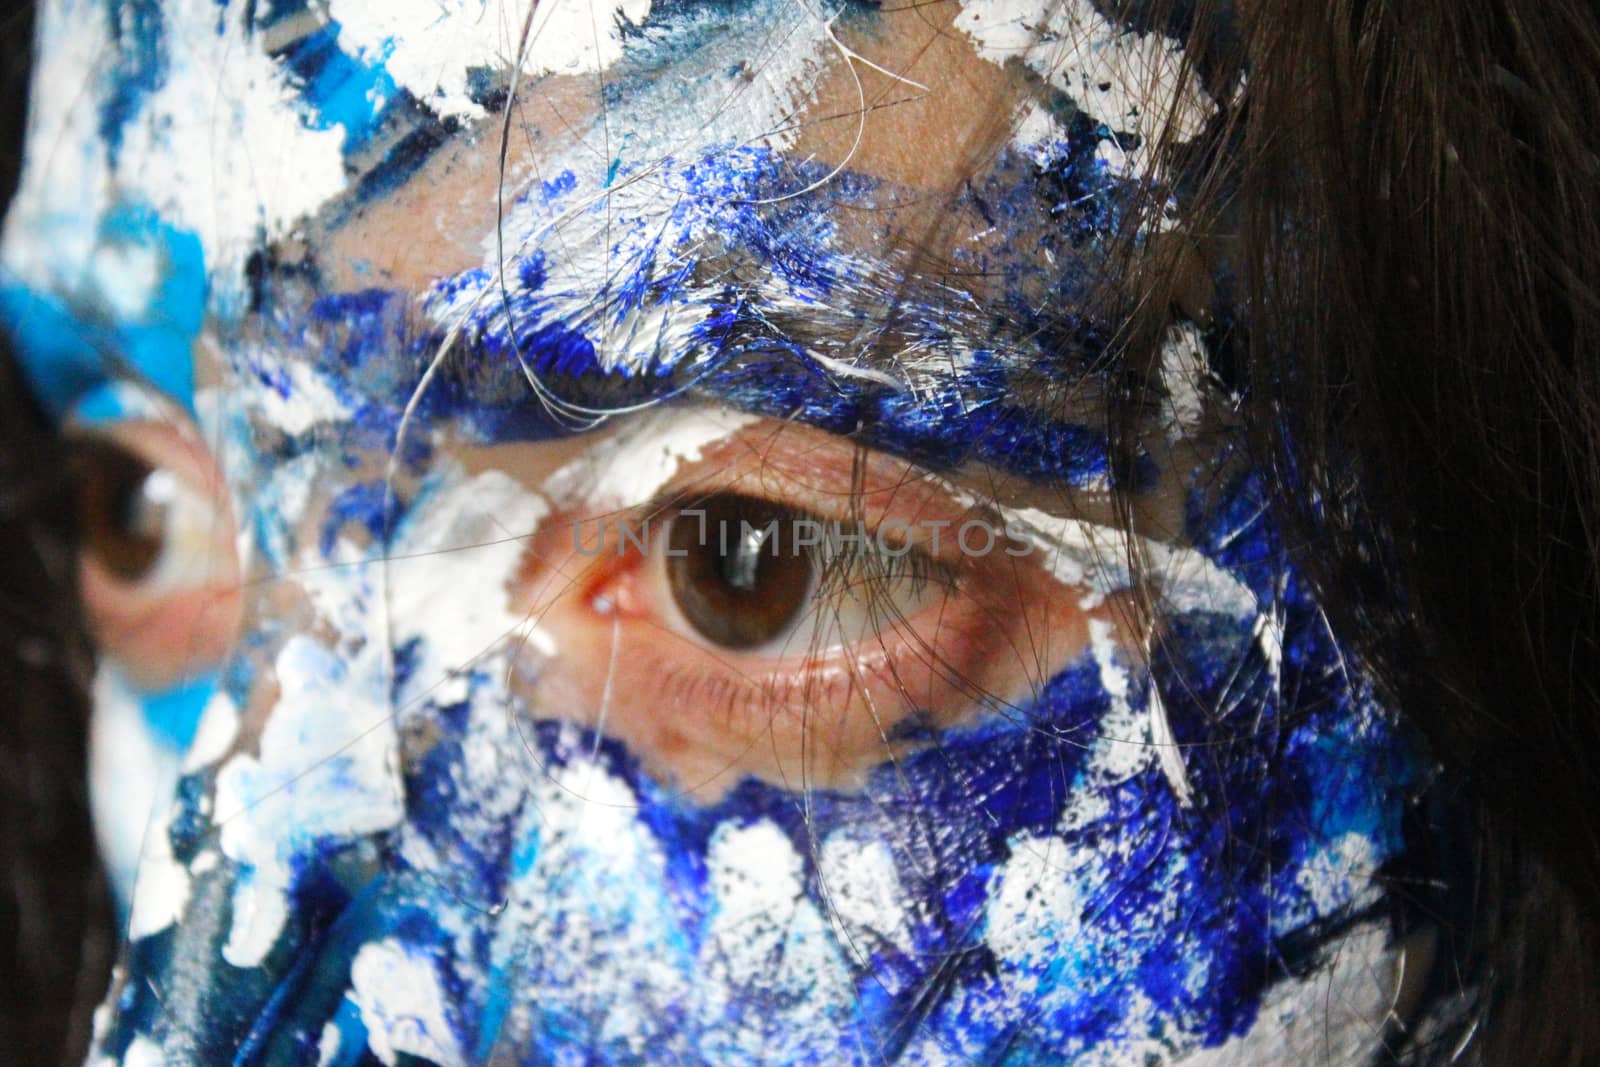 Painted face with acrylic blue and white colors. Young beautiful woman portrait, close-up photo.